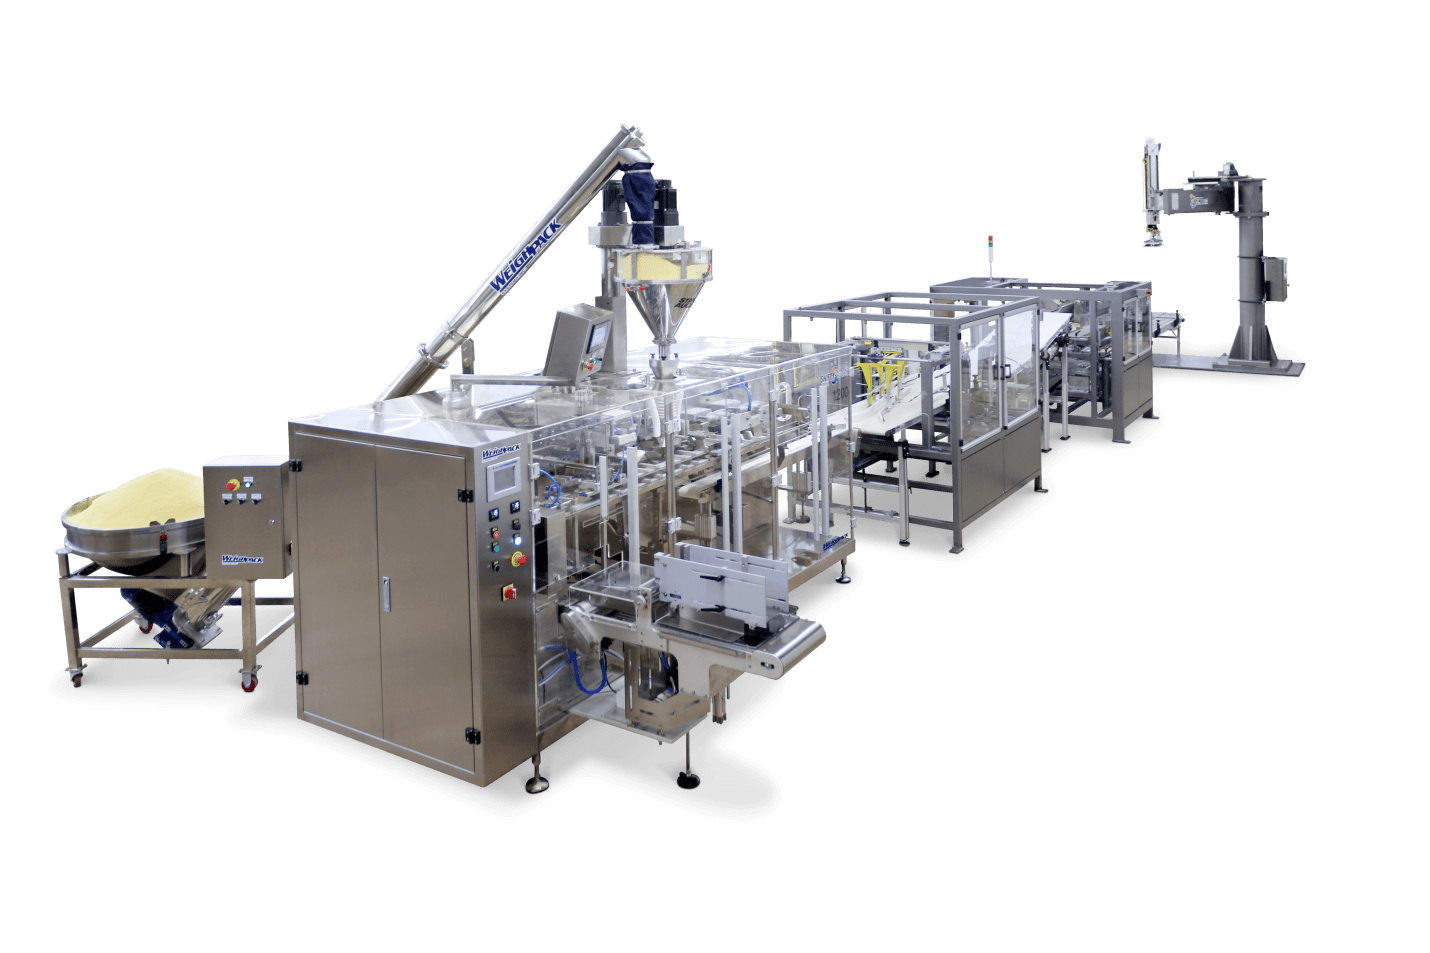 Full automated line of packaging machines